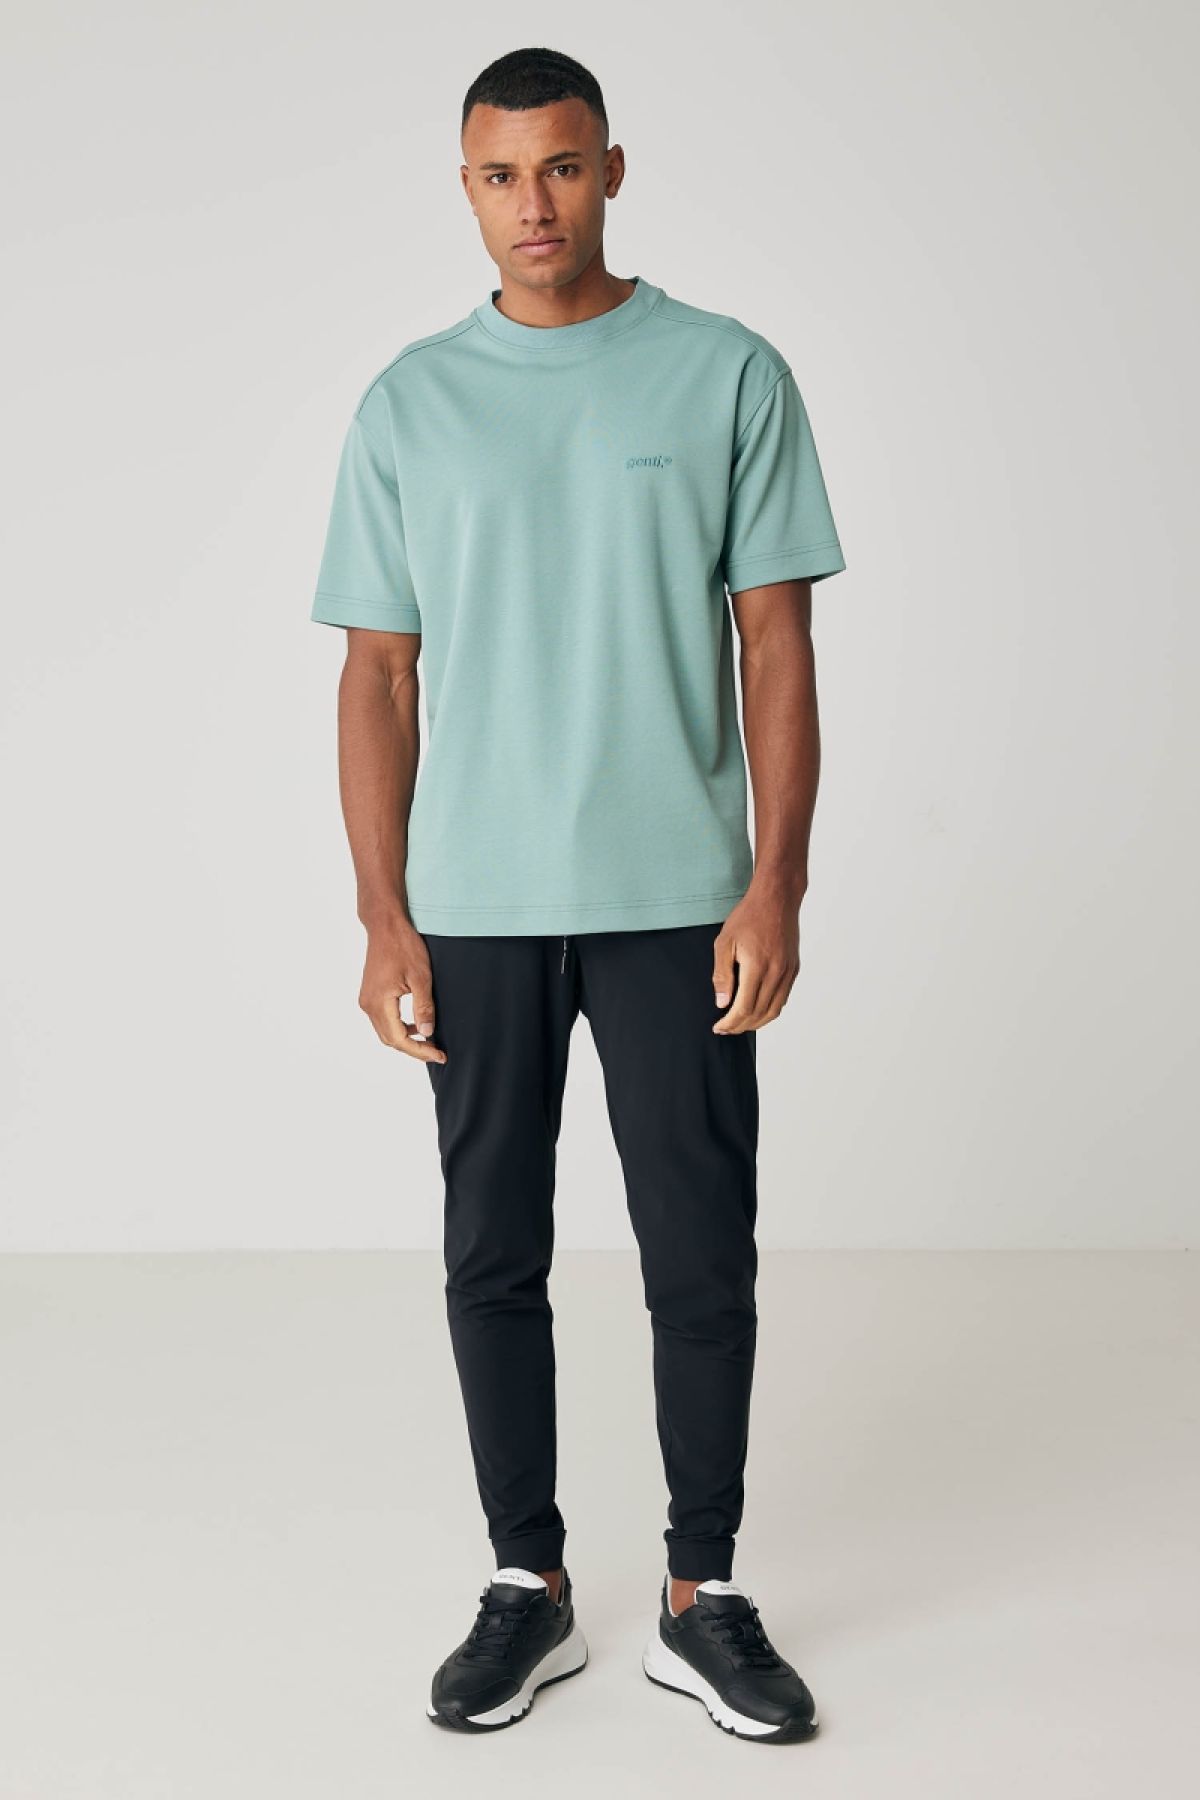 Relaxed fit tee groen